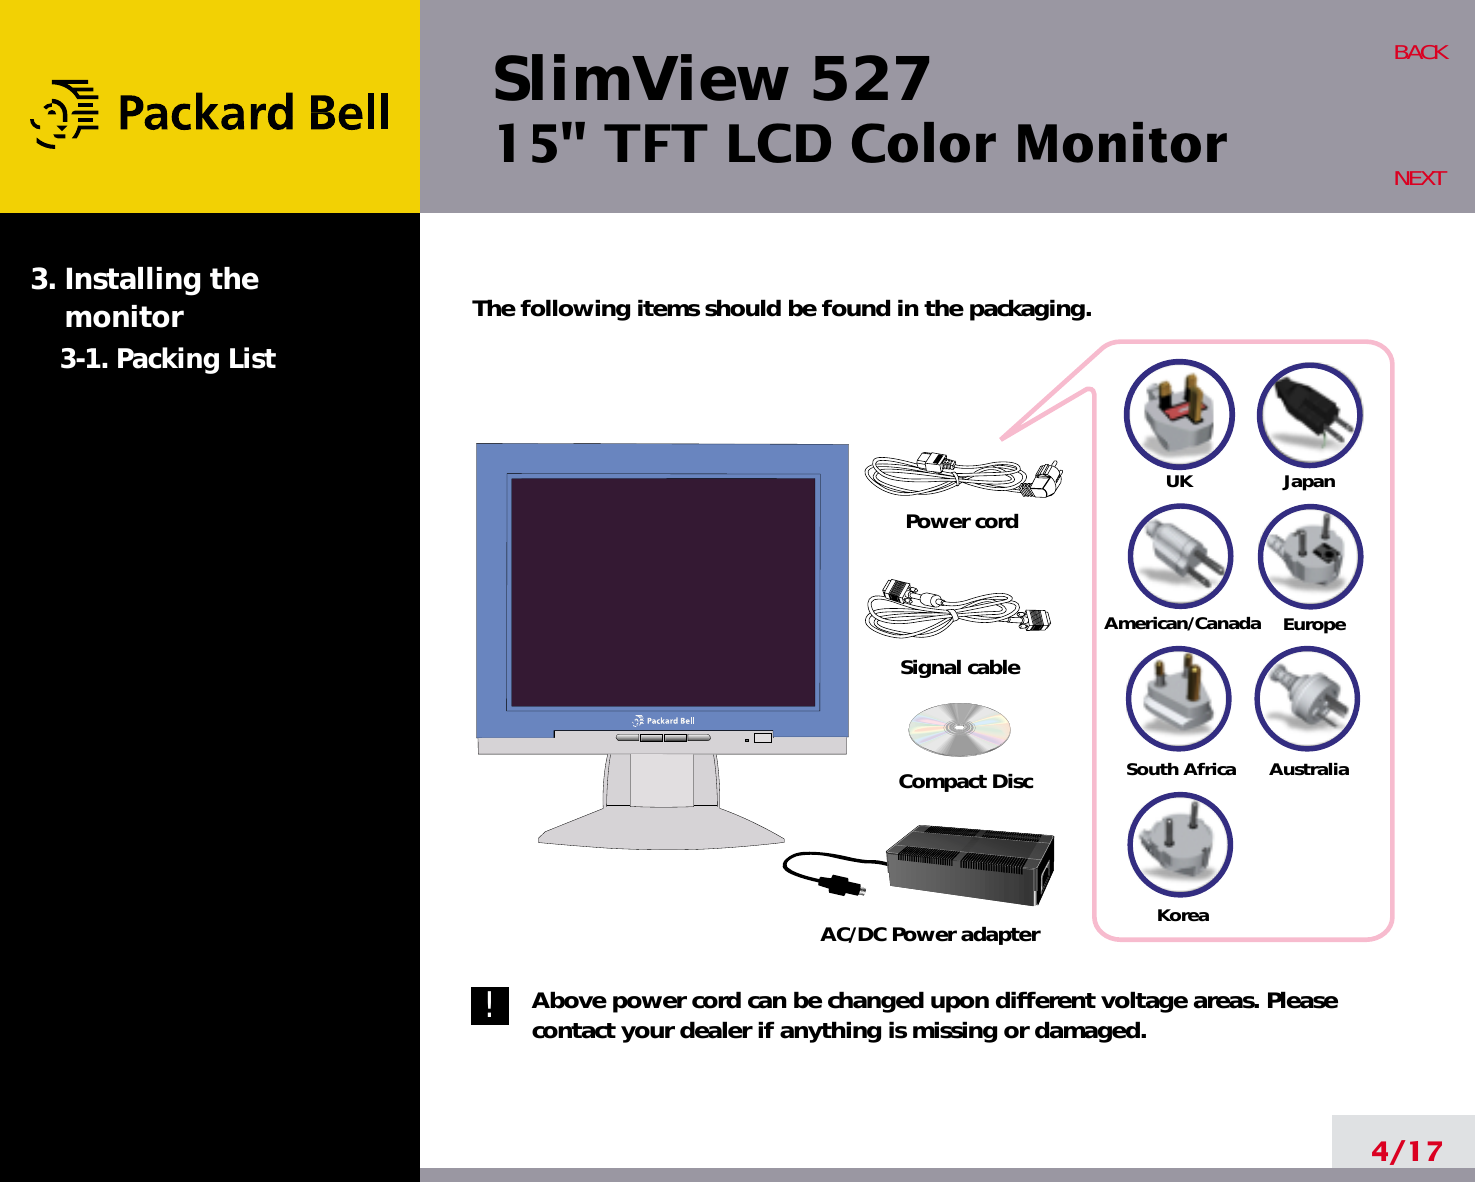 SlimView 52715&quot; TFT LCD Color Monitor4/17BACKNEXTThe following items should be found in the packaging.Above power cord can be changed upon different voltage areas. Pleasecontact your dealer if anything is missing or damaged.3. Installing the monitor3-1. Packing List!UKAmerican/CanadaJapanAustraliaKoreaEuropeSouth AfricaPower cordSignal cableAC/DC Power adapterCompact Disc